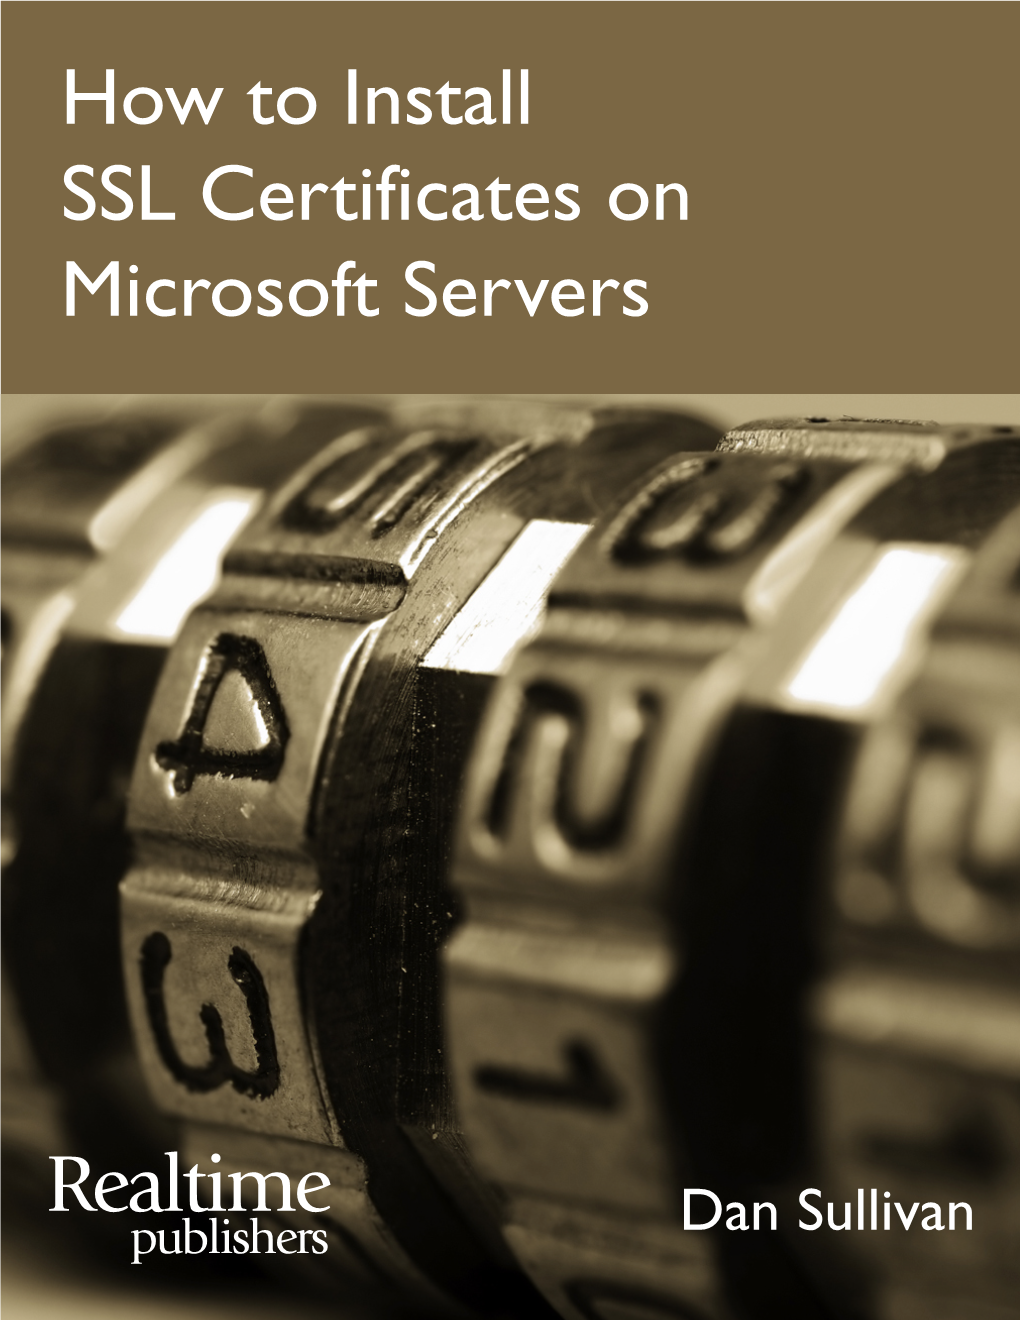 How to Install SSL Certificates on Microsoft Servers